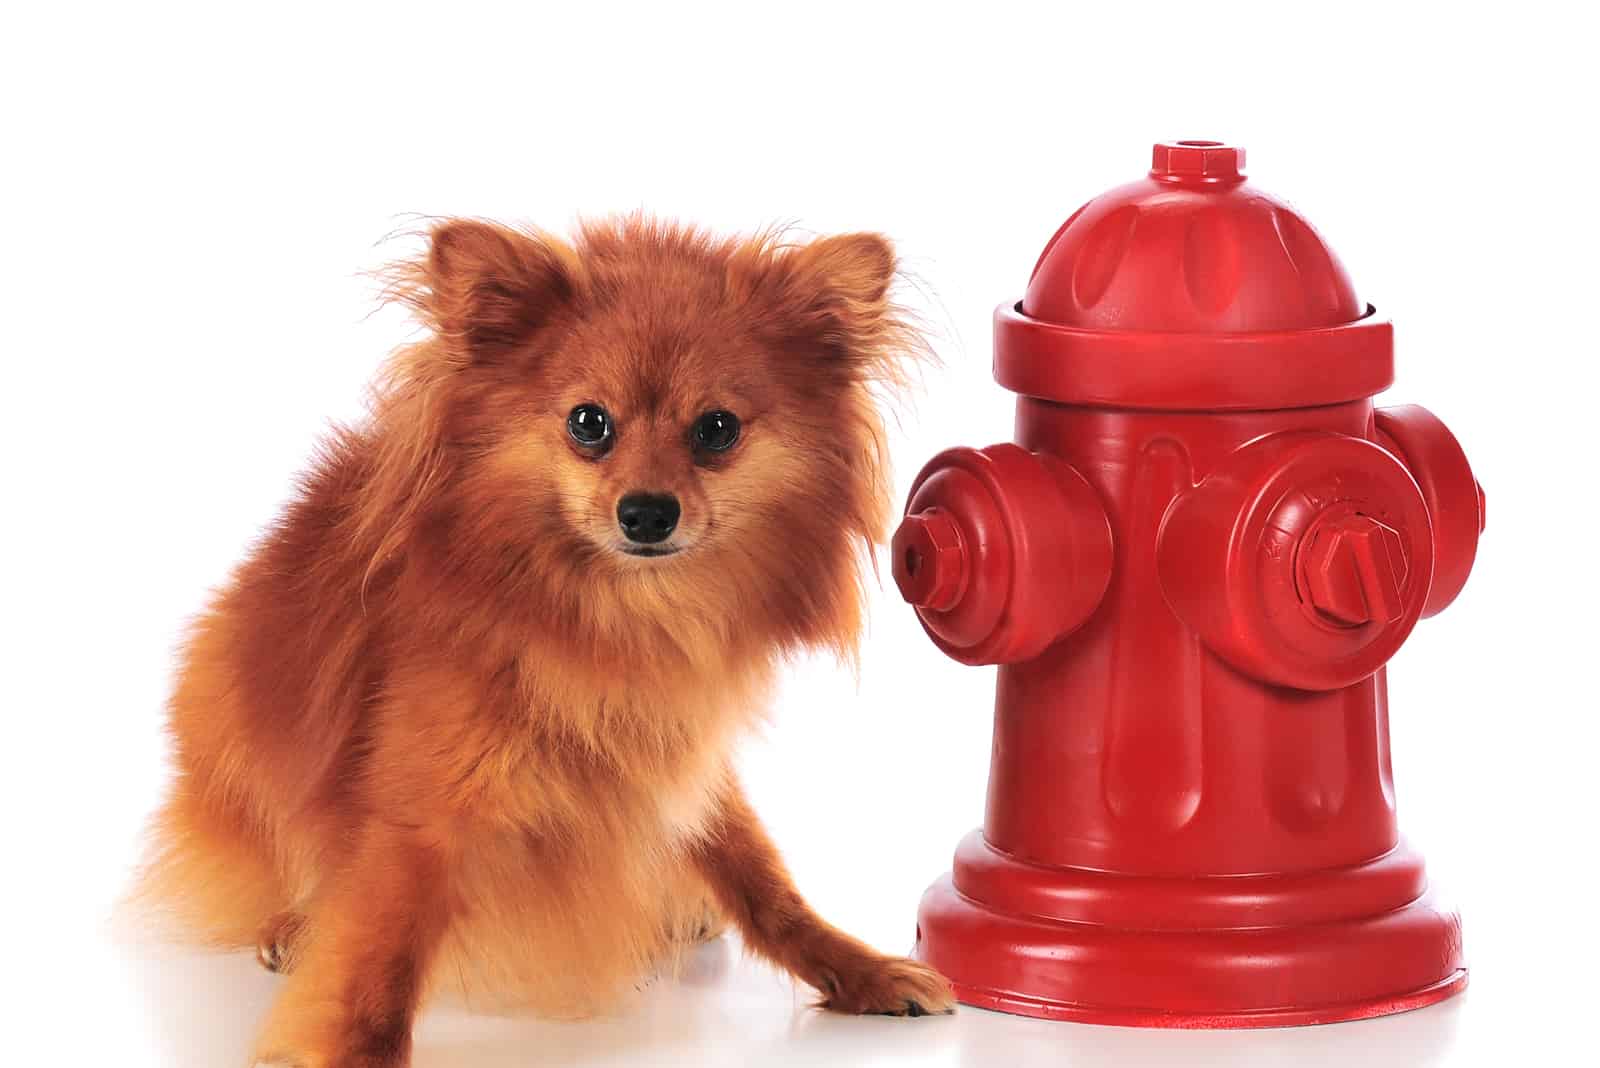 Fire Hydrant For Dogs: Our 8 Favorite Picks!